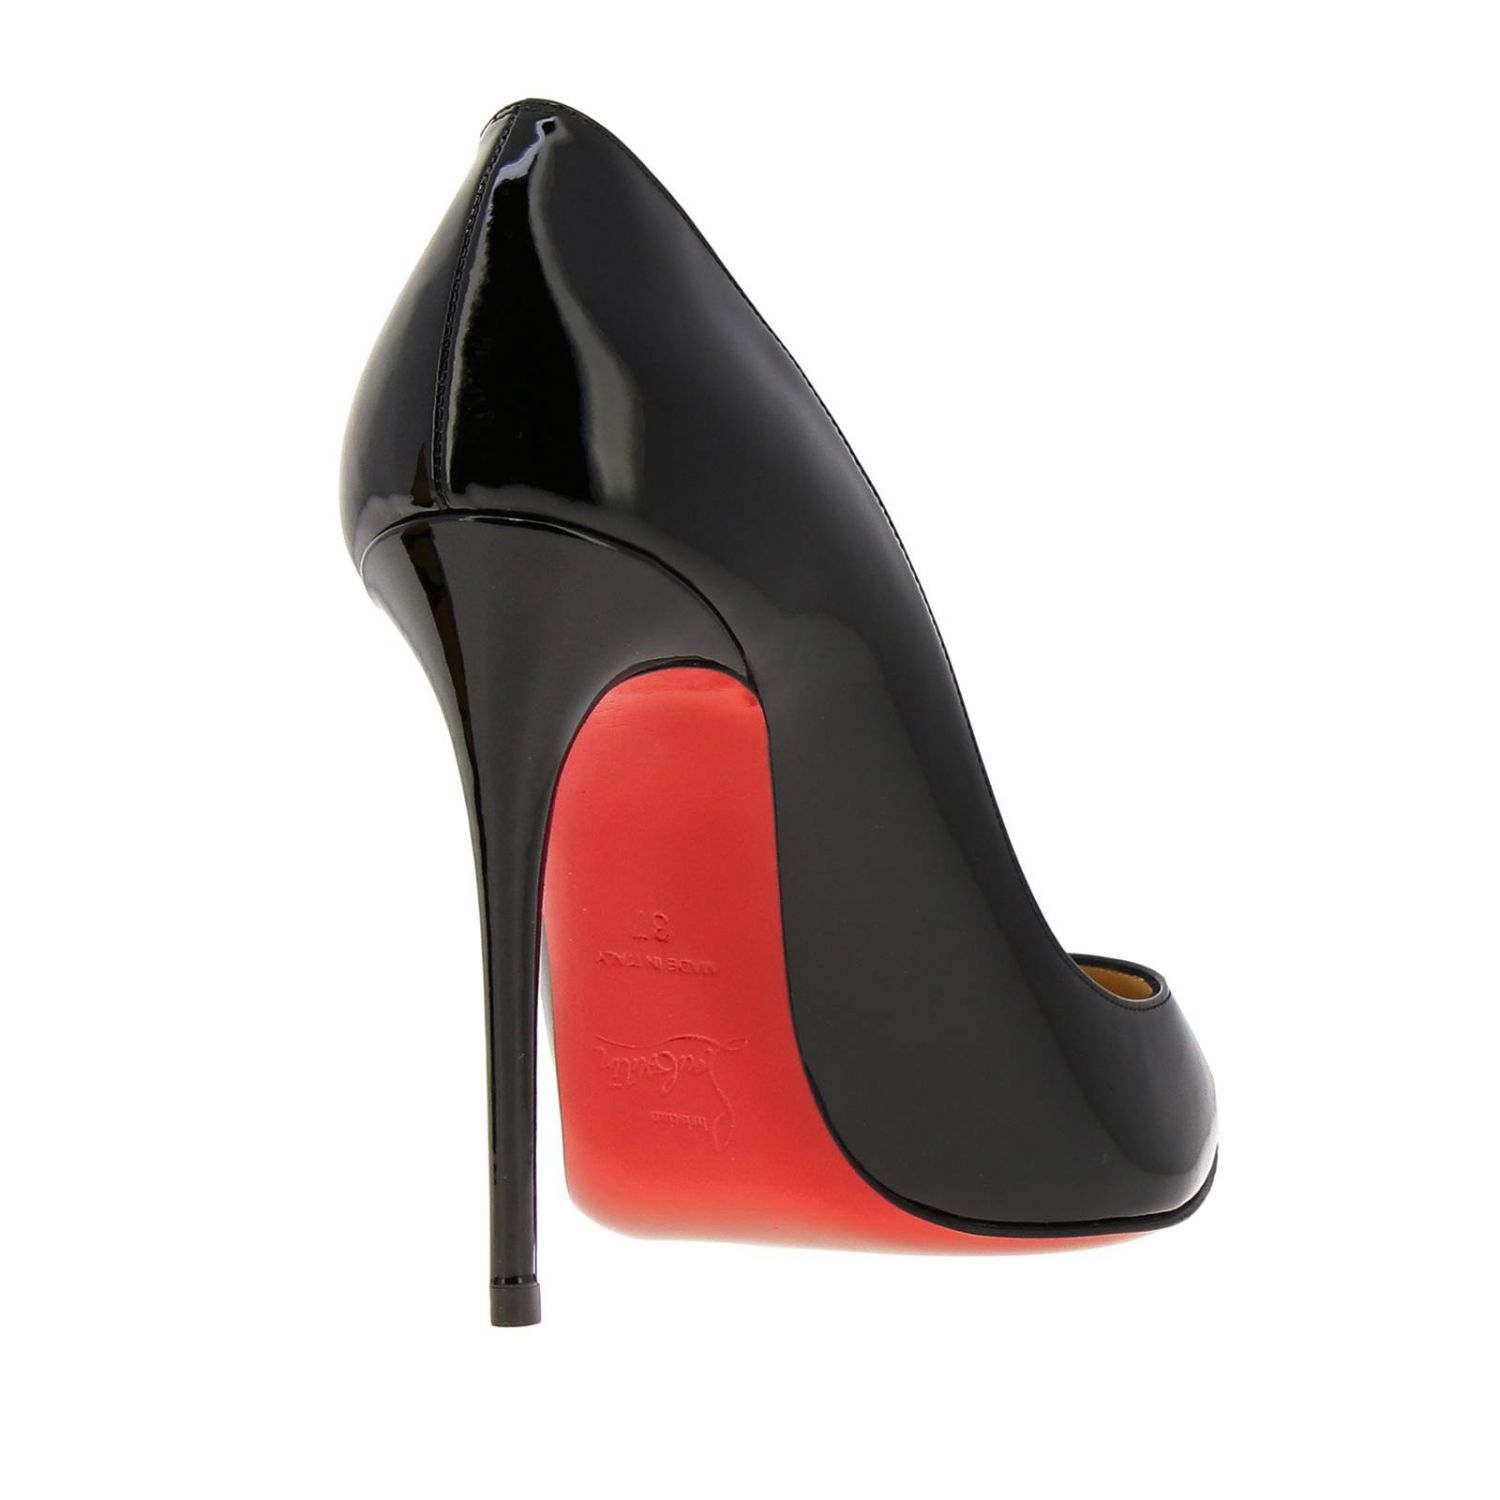 CHRISTIAN LOUBOUTIN: Pigalle Follies classic patent leather pumps ...